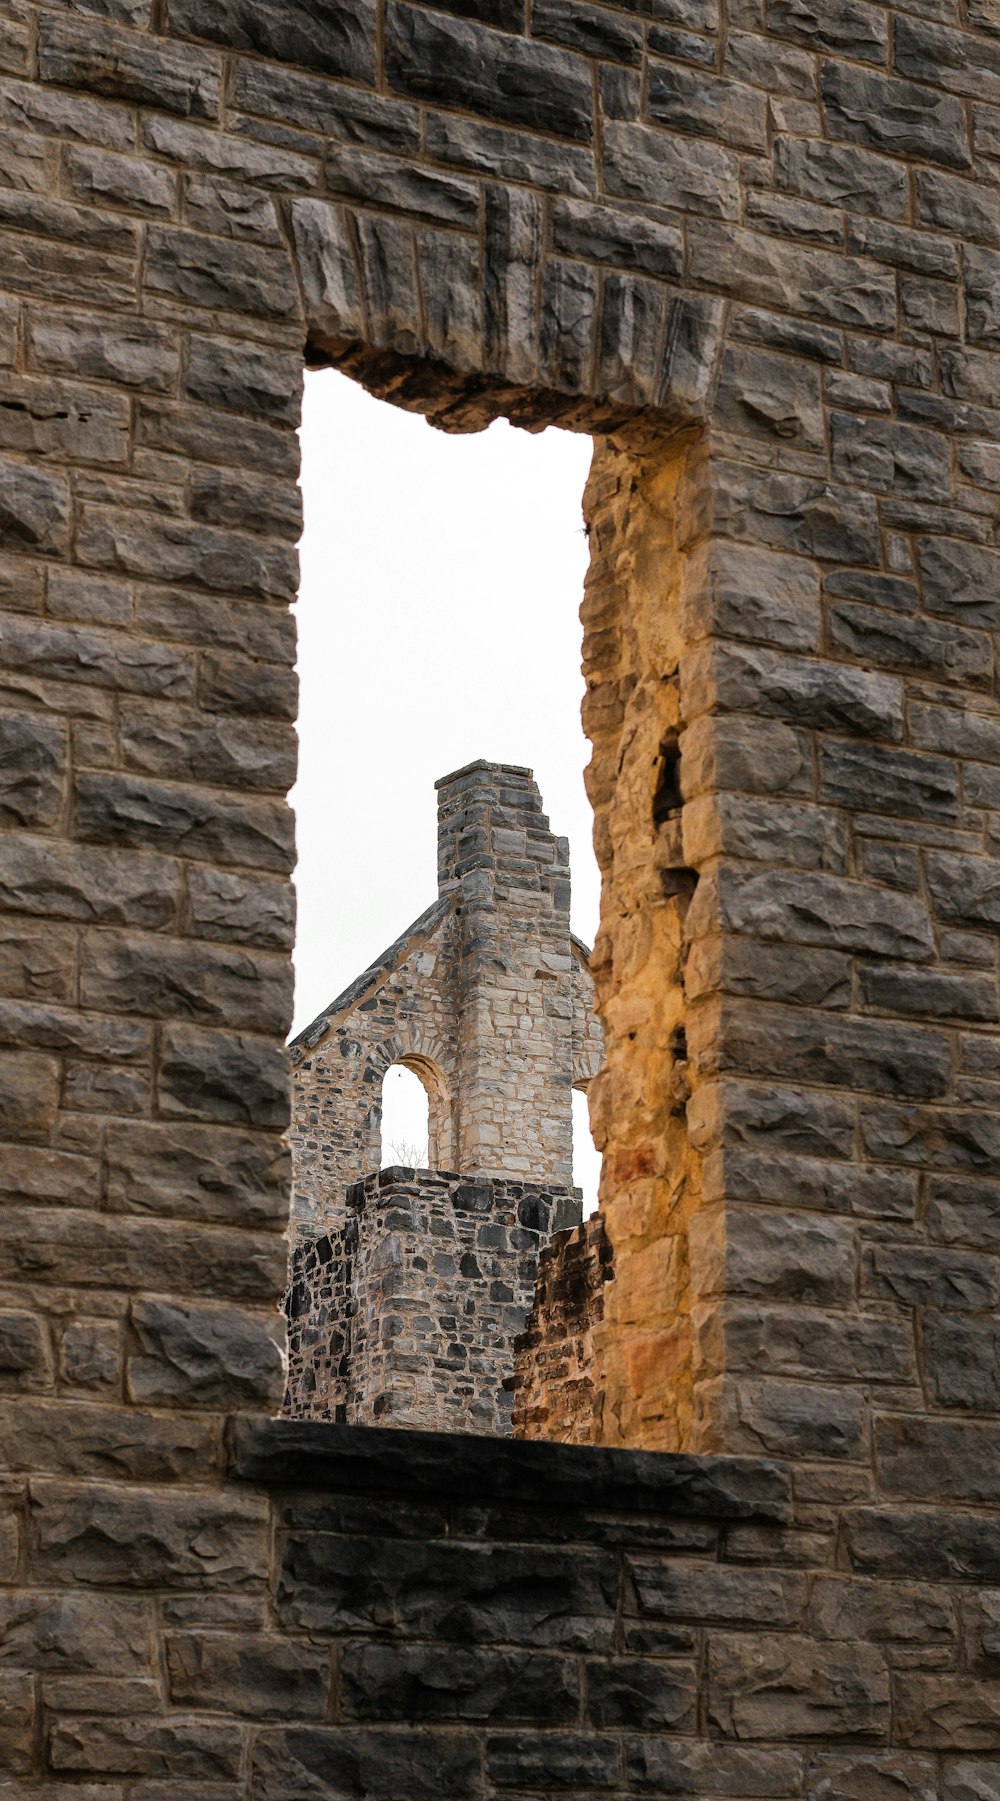 a stone building with a window in it